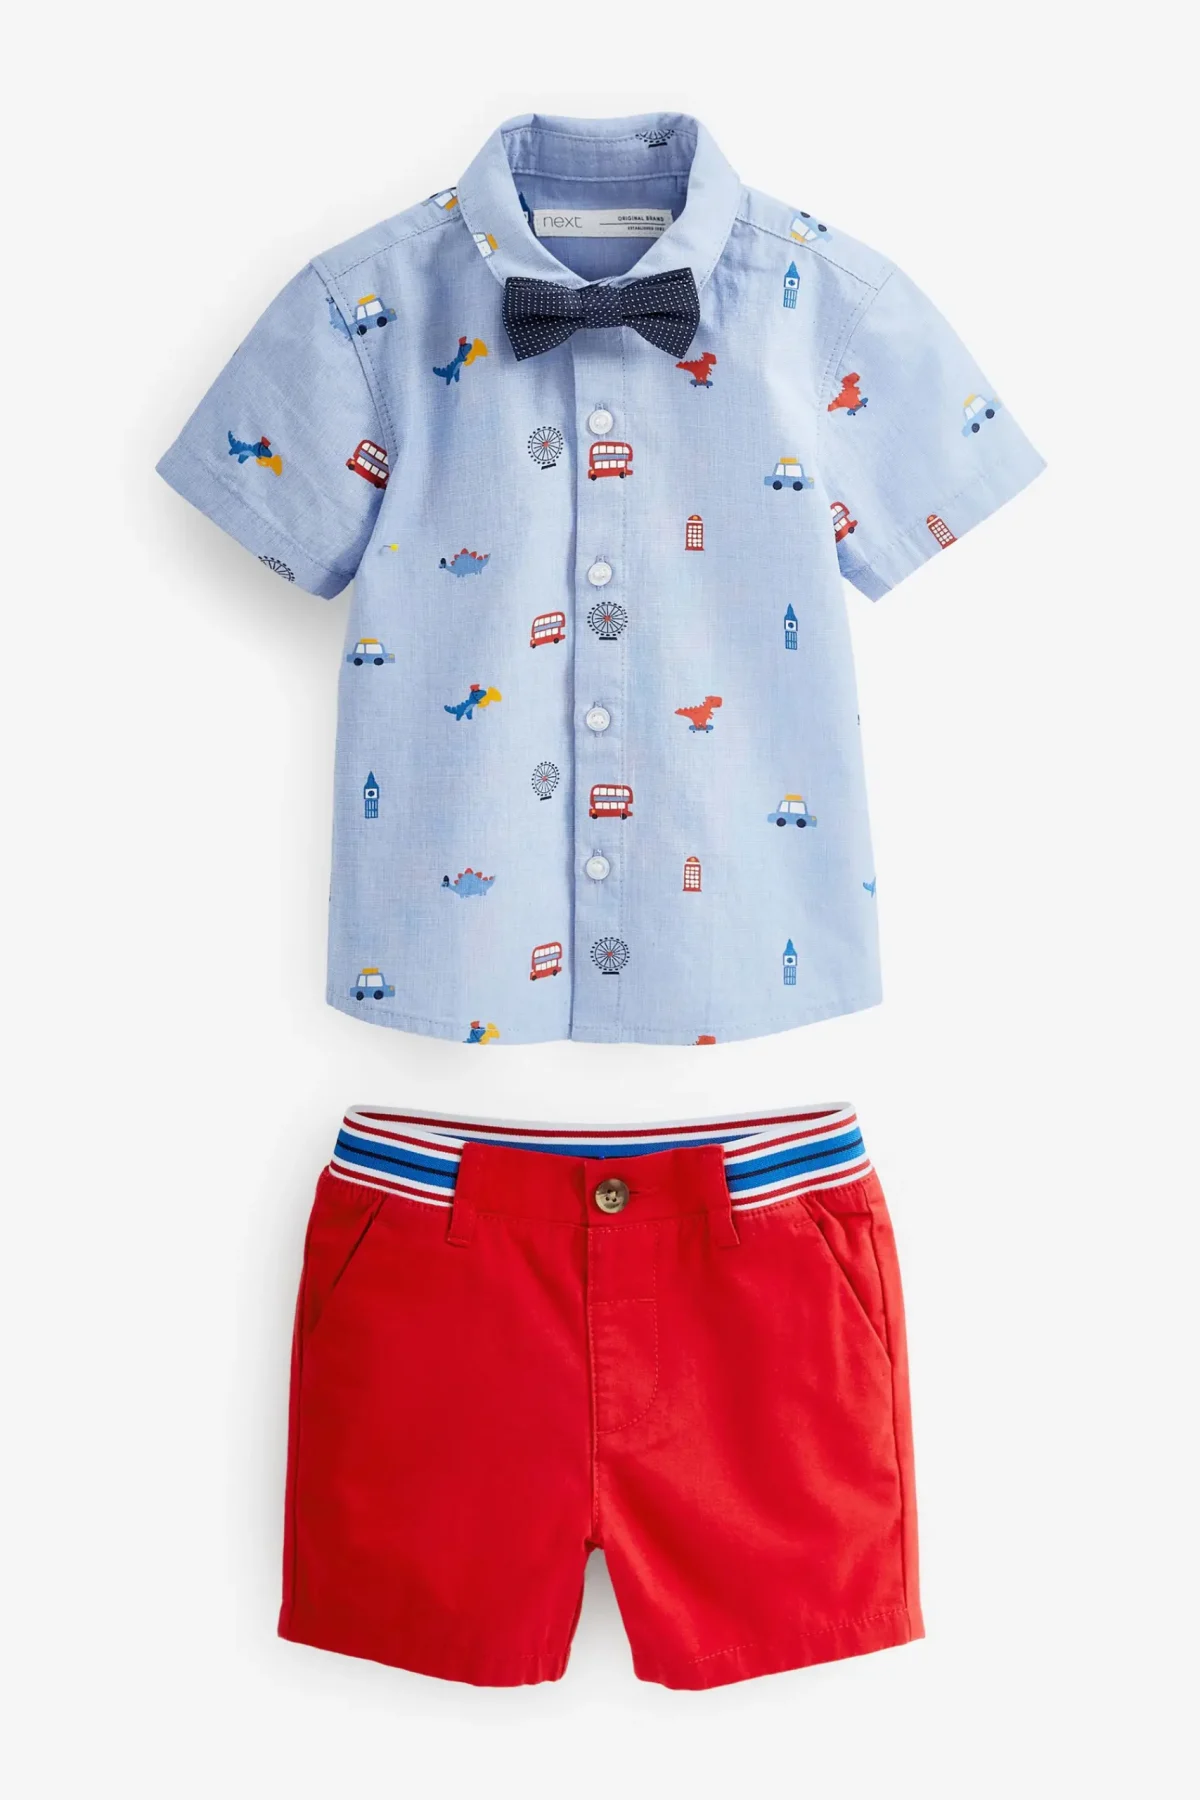 official red shirt and shorts set of with dinosaur design